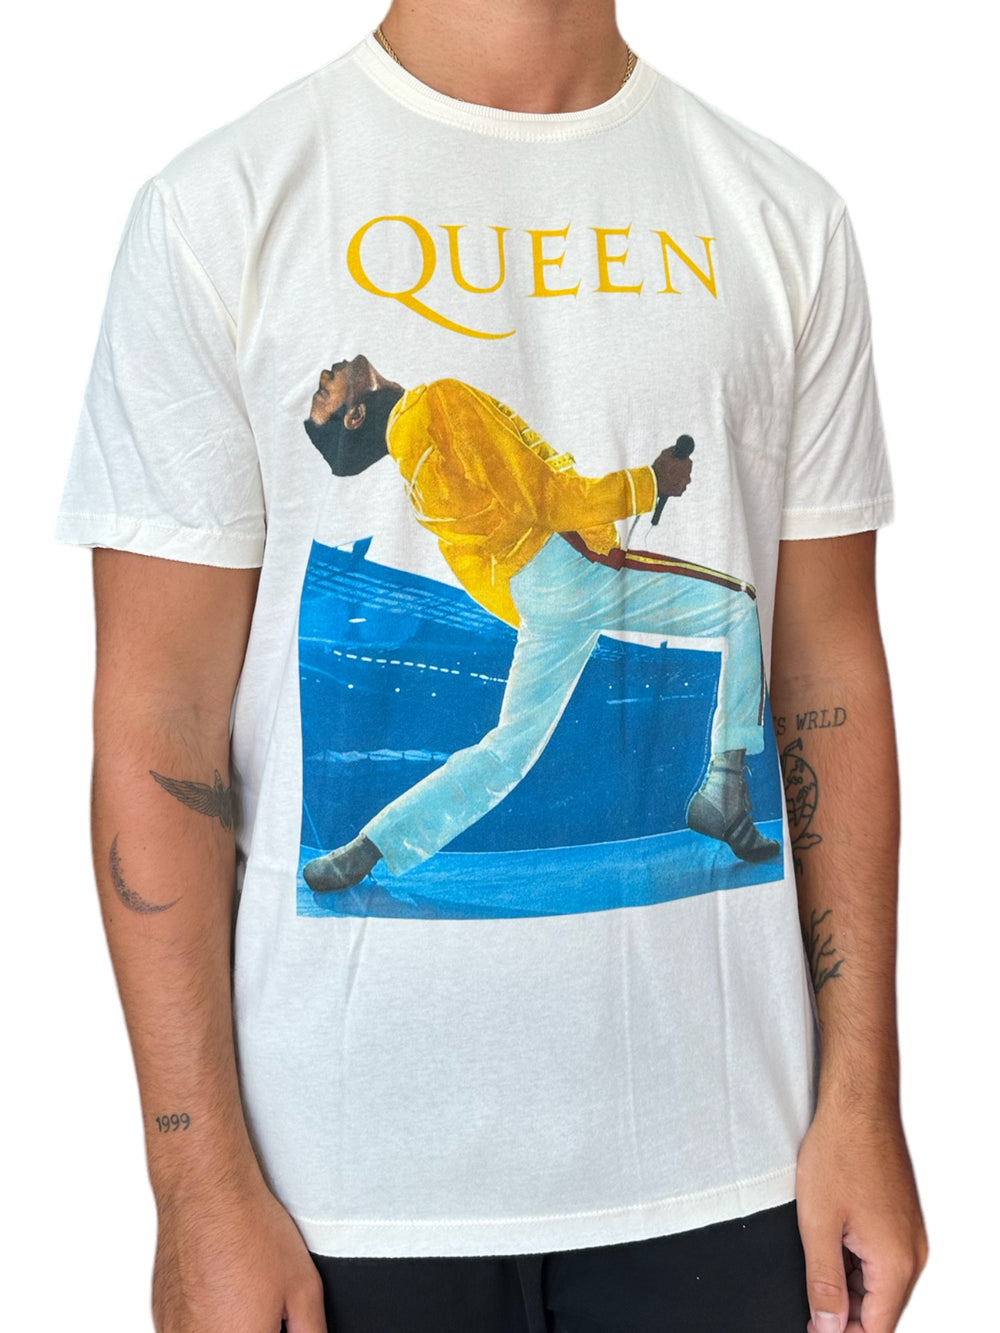 Queen - Freddie Triangle Amplified Vintage White T Shirt Various Sizes NEW